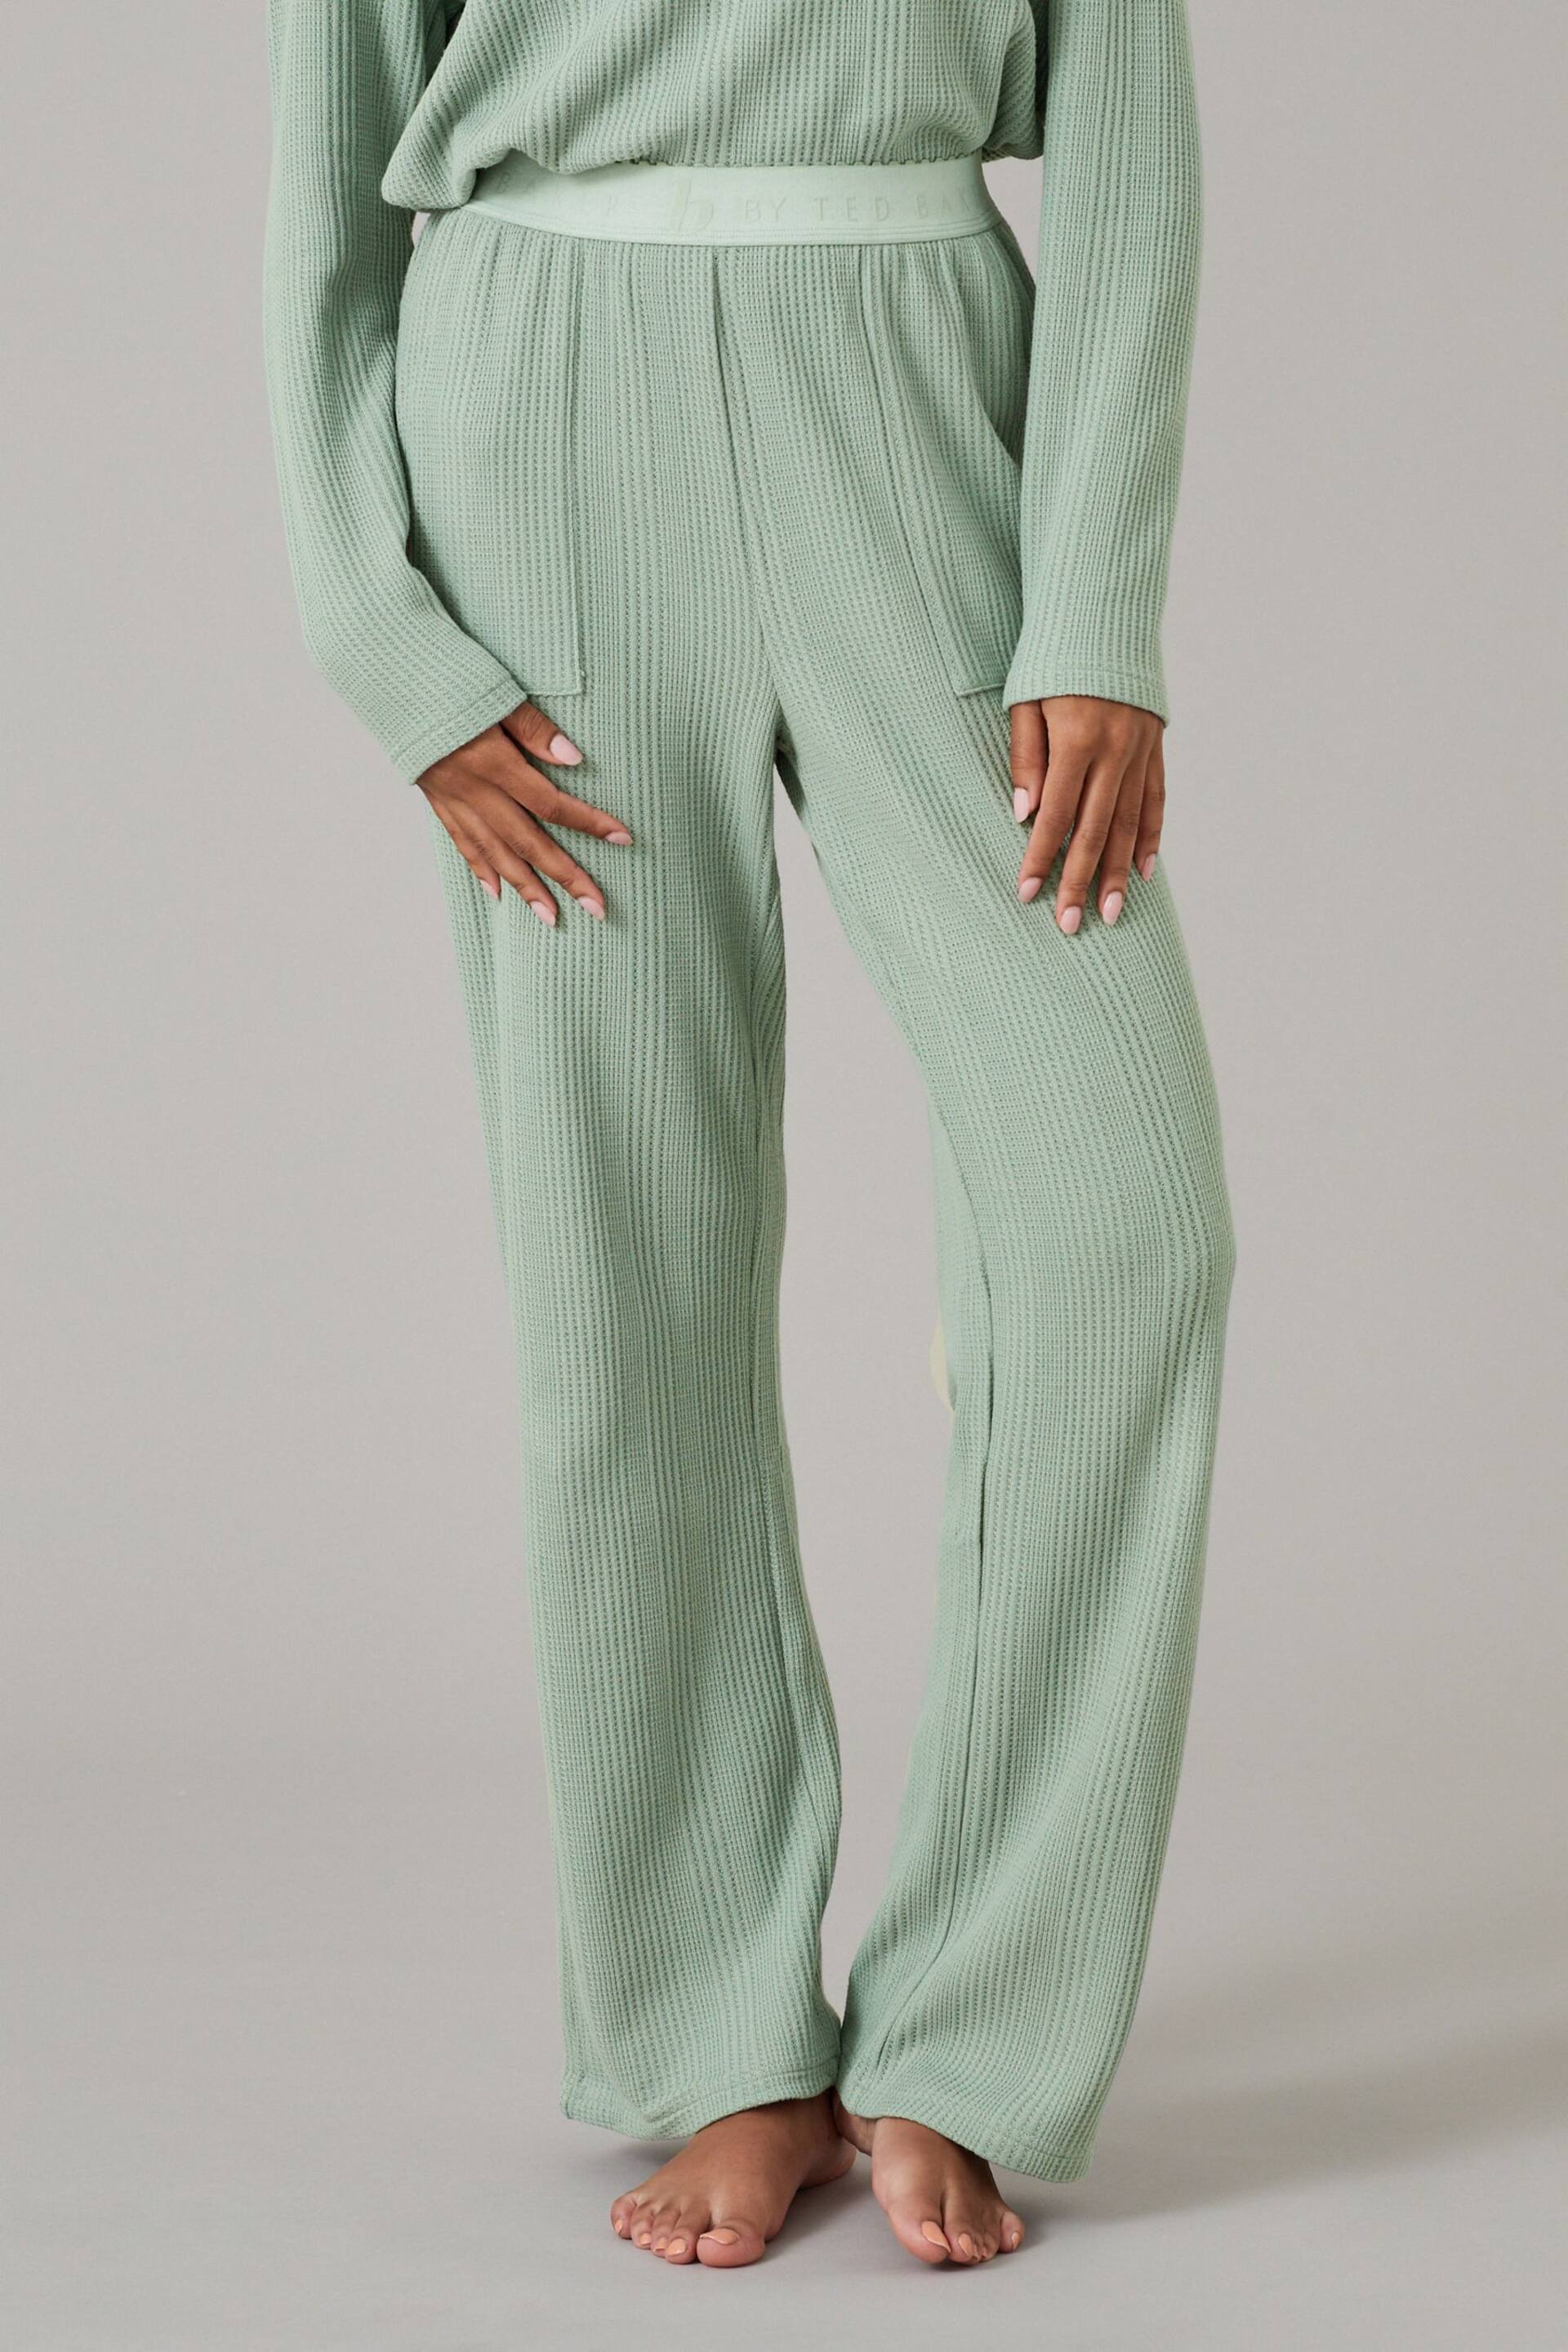 B by Ted Baker Waffle Lounge Wide Leg Trousers - Image 3 of 6